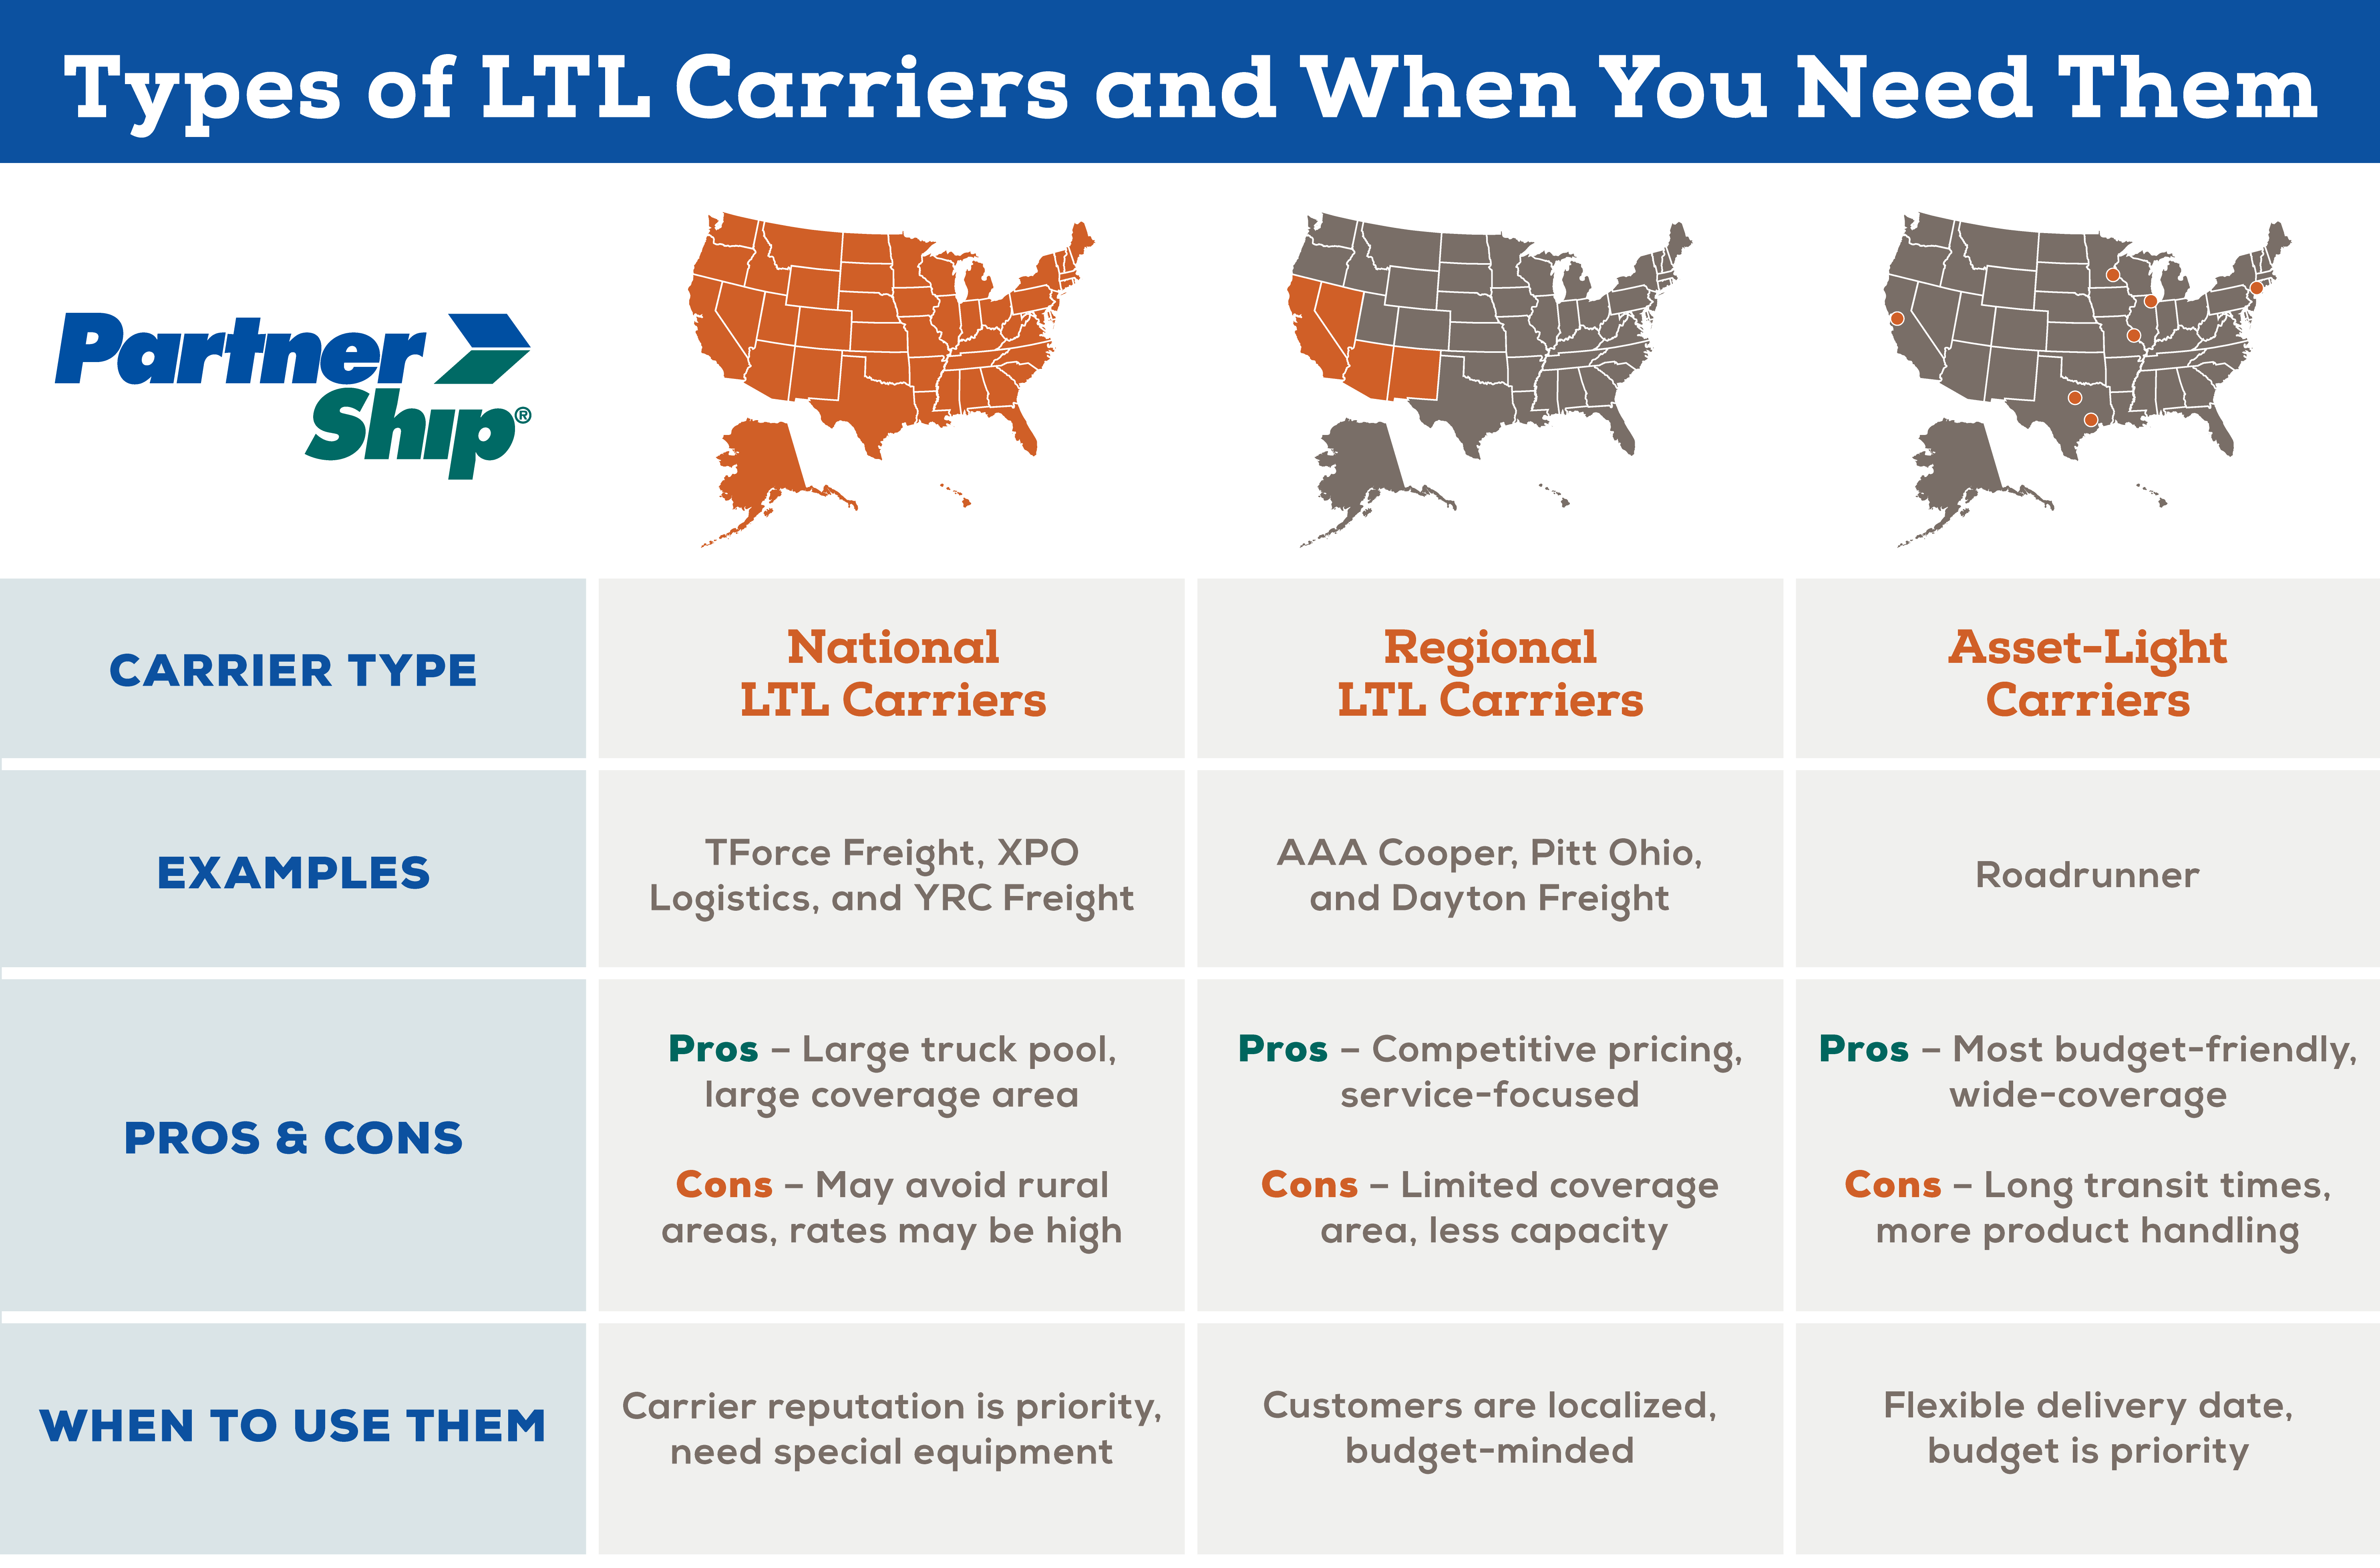 Types of LTL Carriers Infographic.